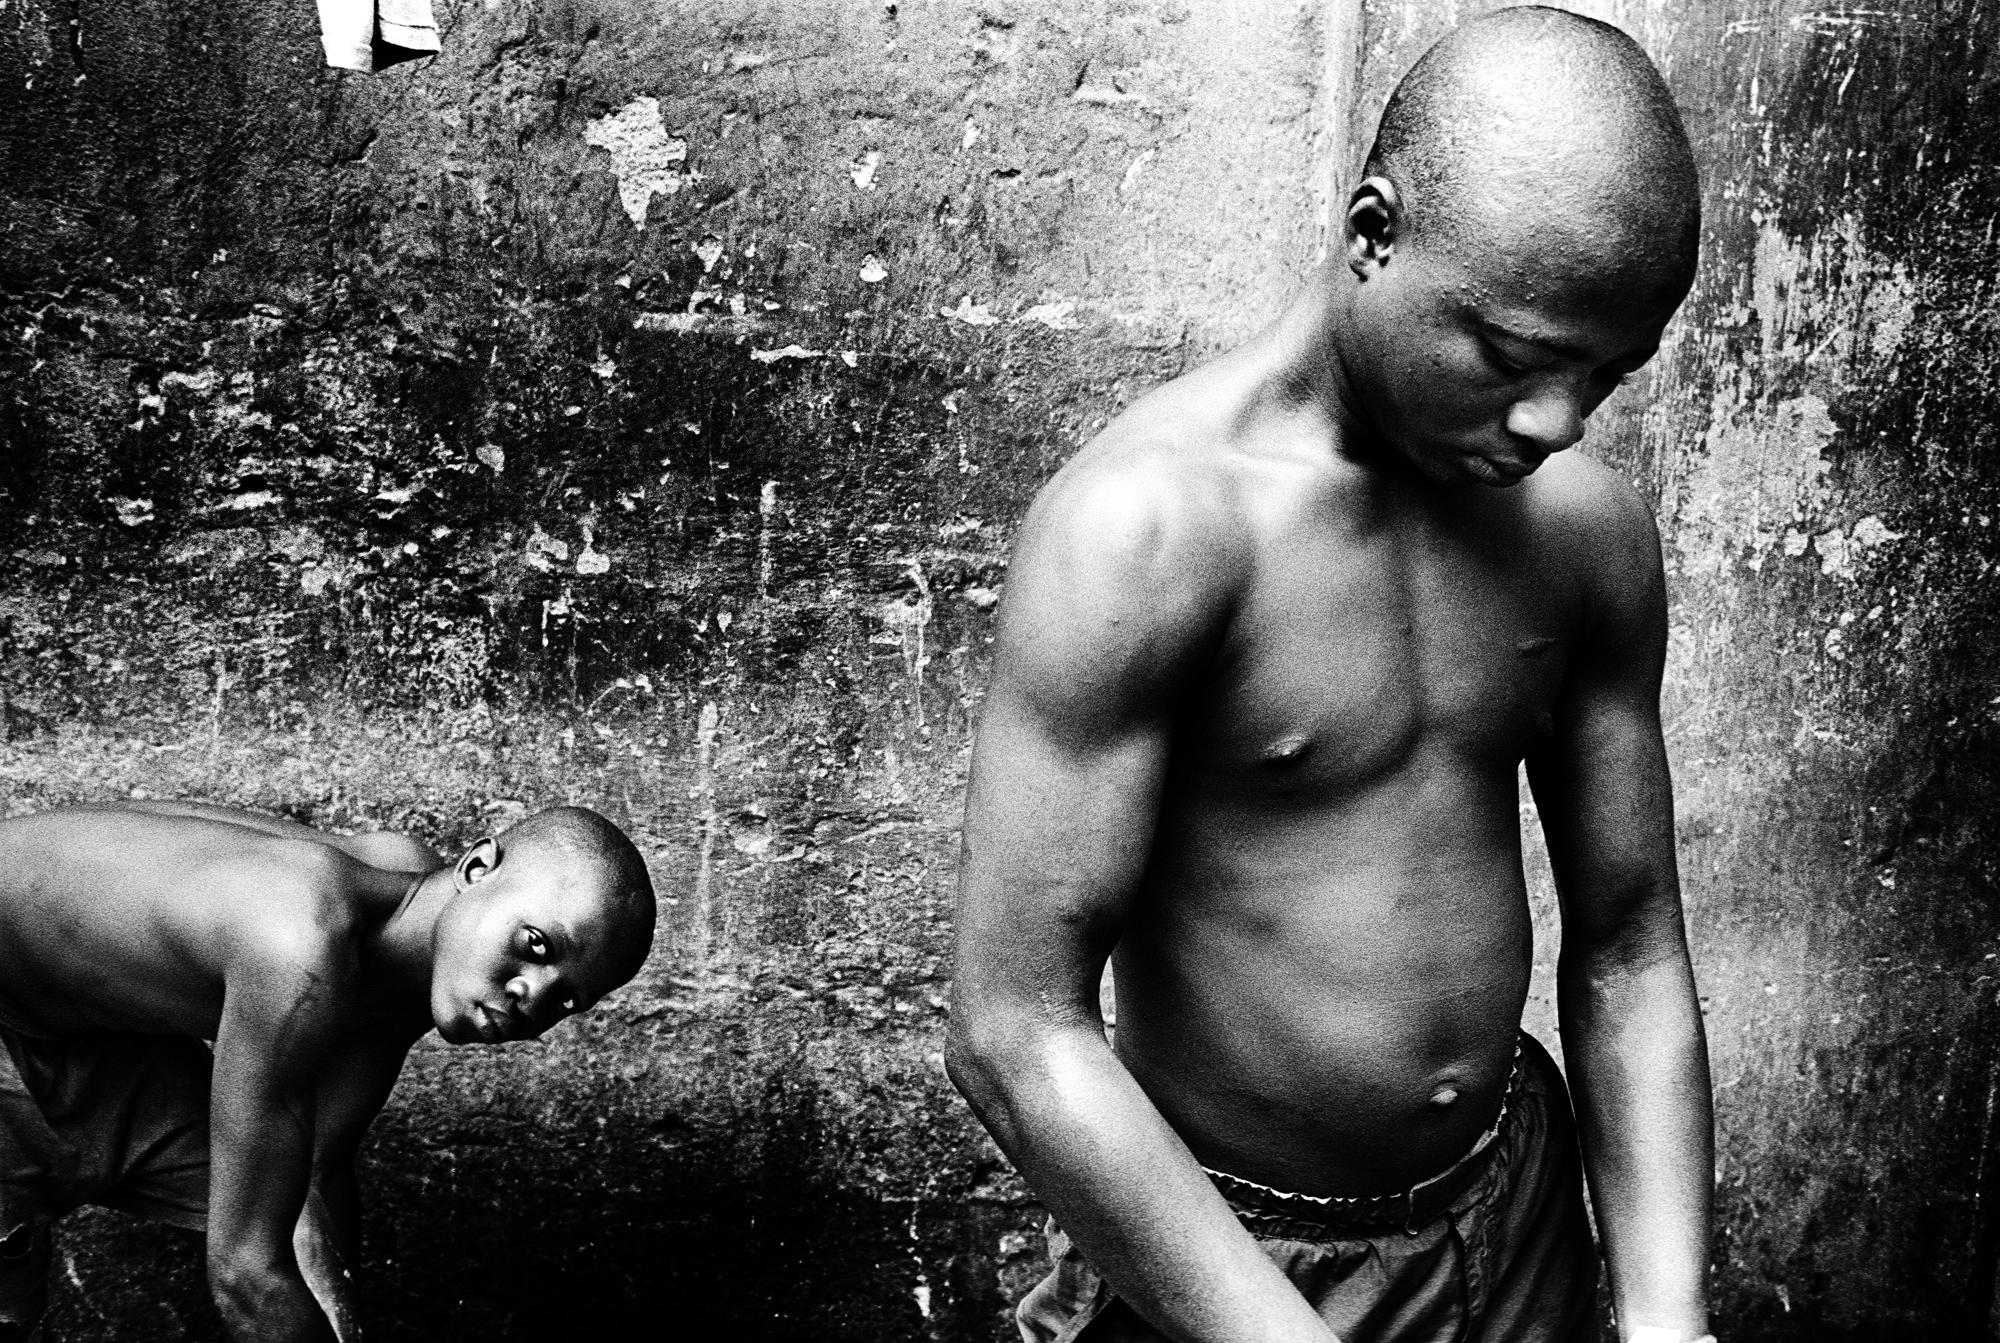 City of rest - SIERRA LEONE Freetown
Two inmates washing their clothes...